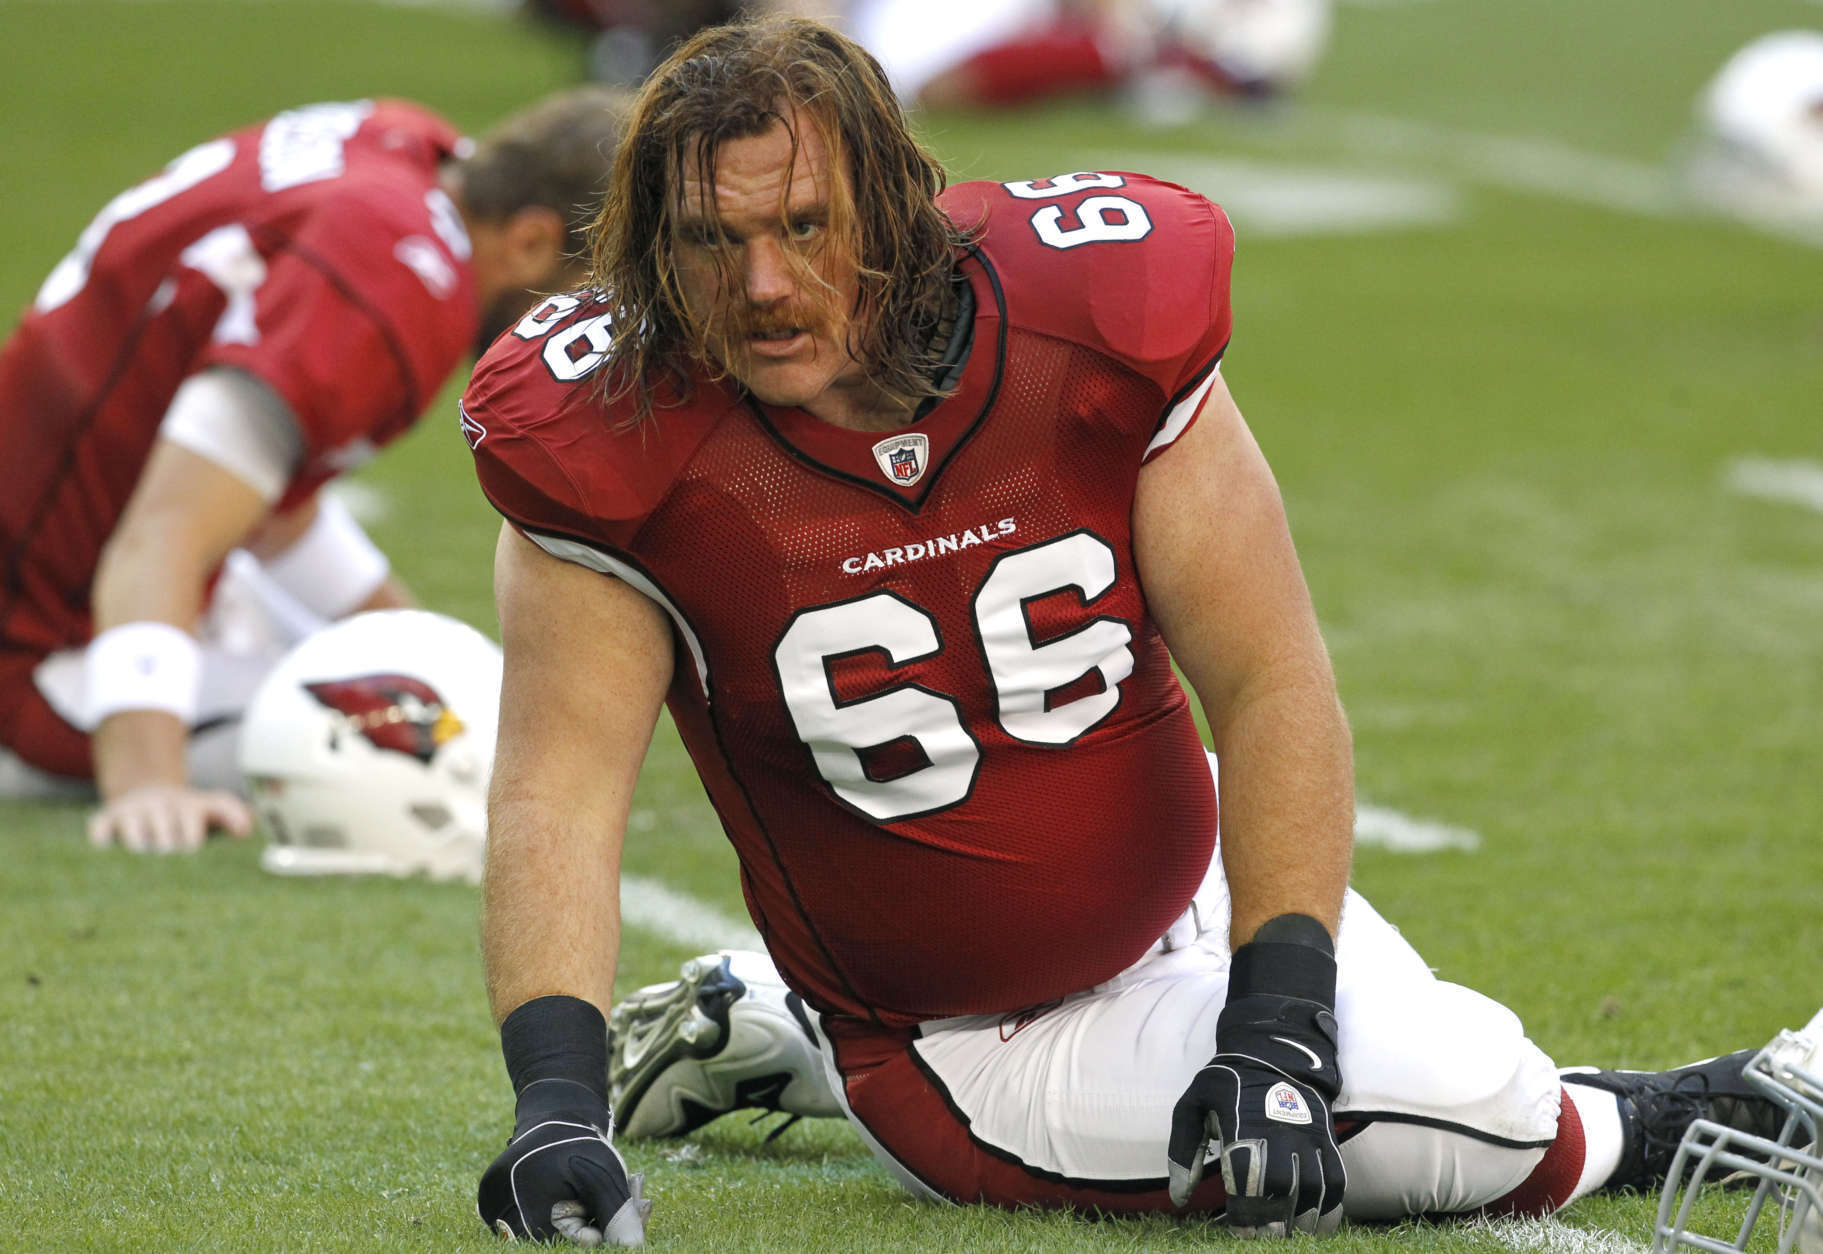 Arizona Cardinals' Alan Faneca (66) stretches prior to an NFL football game against the St. Louis Rams Sunday, Dec. 5, 2010, in Glendale, Ariz.  The Rams defeated the Cardinals 19-6. (AP Photo/Ross D. Franklin)